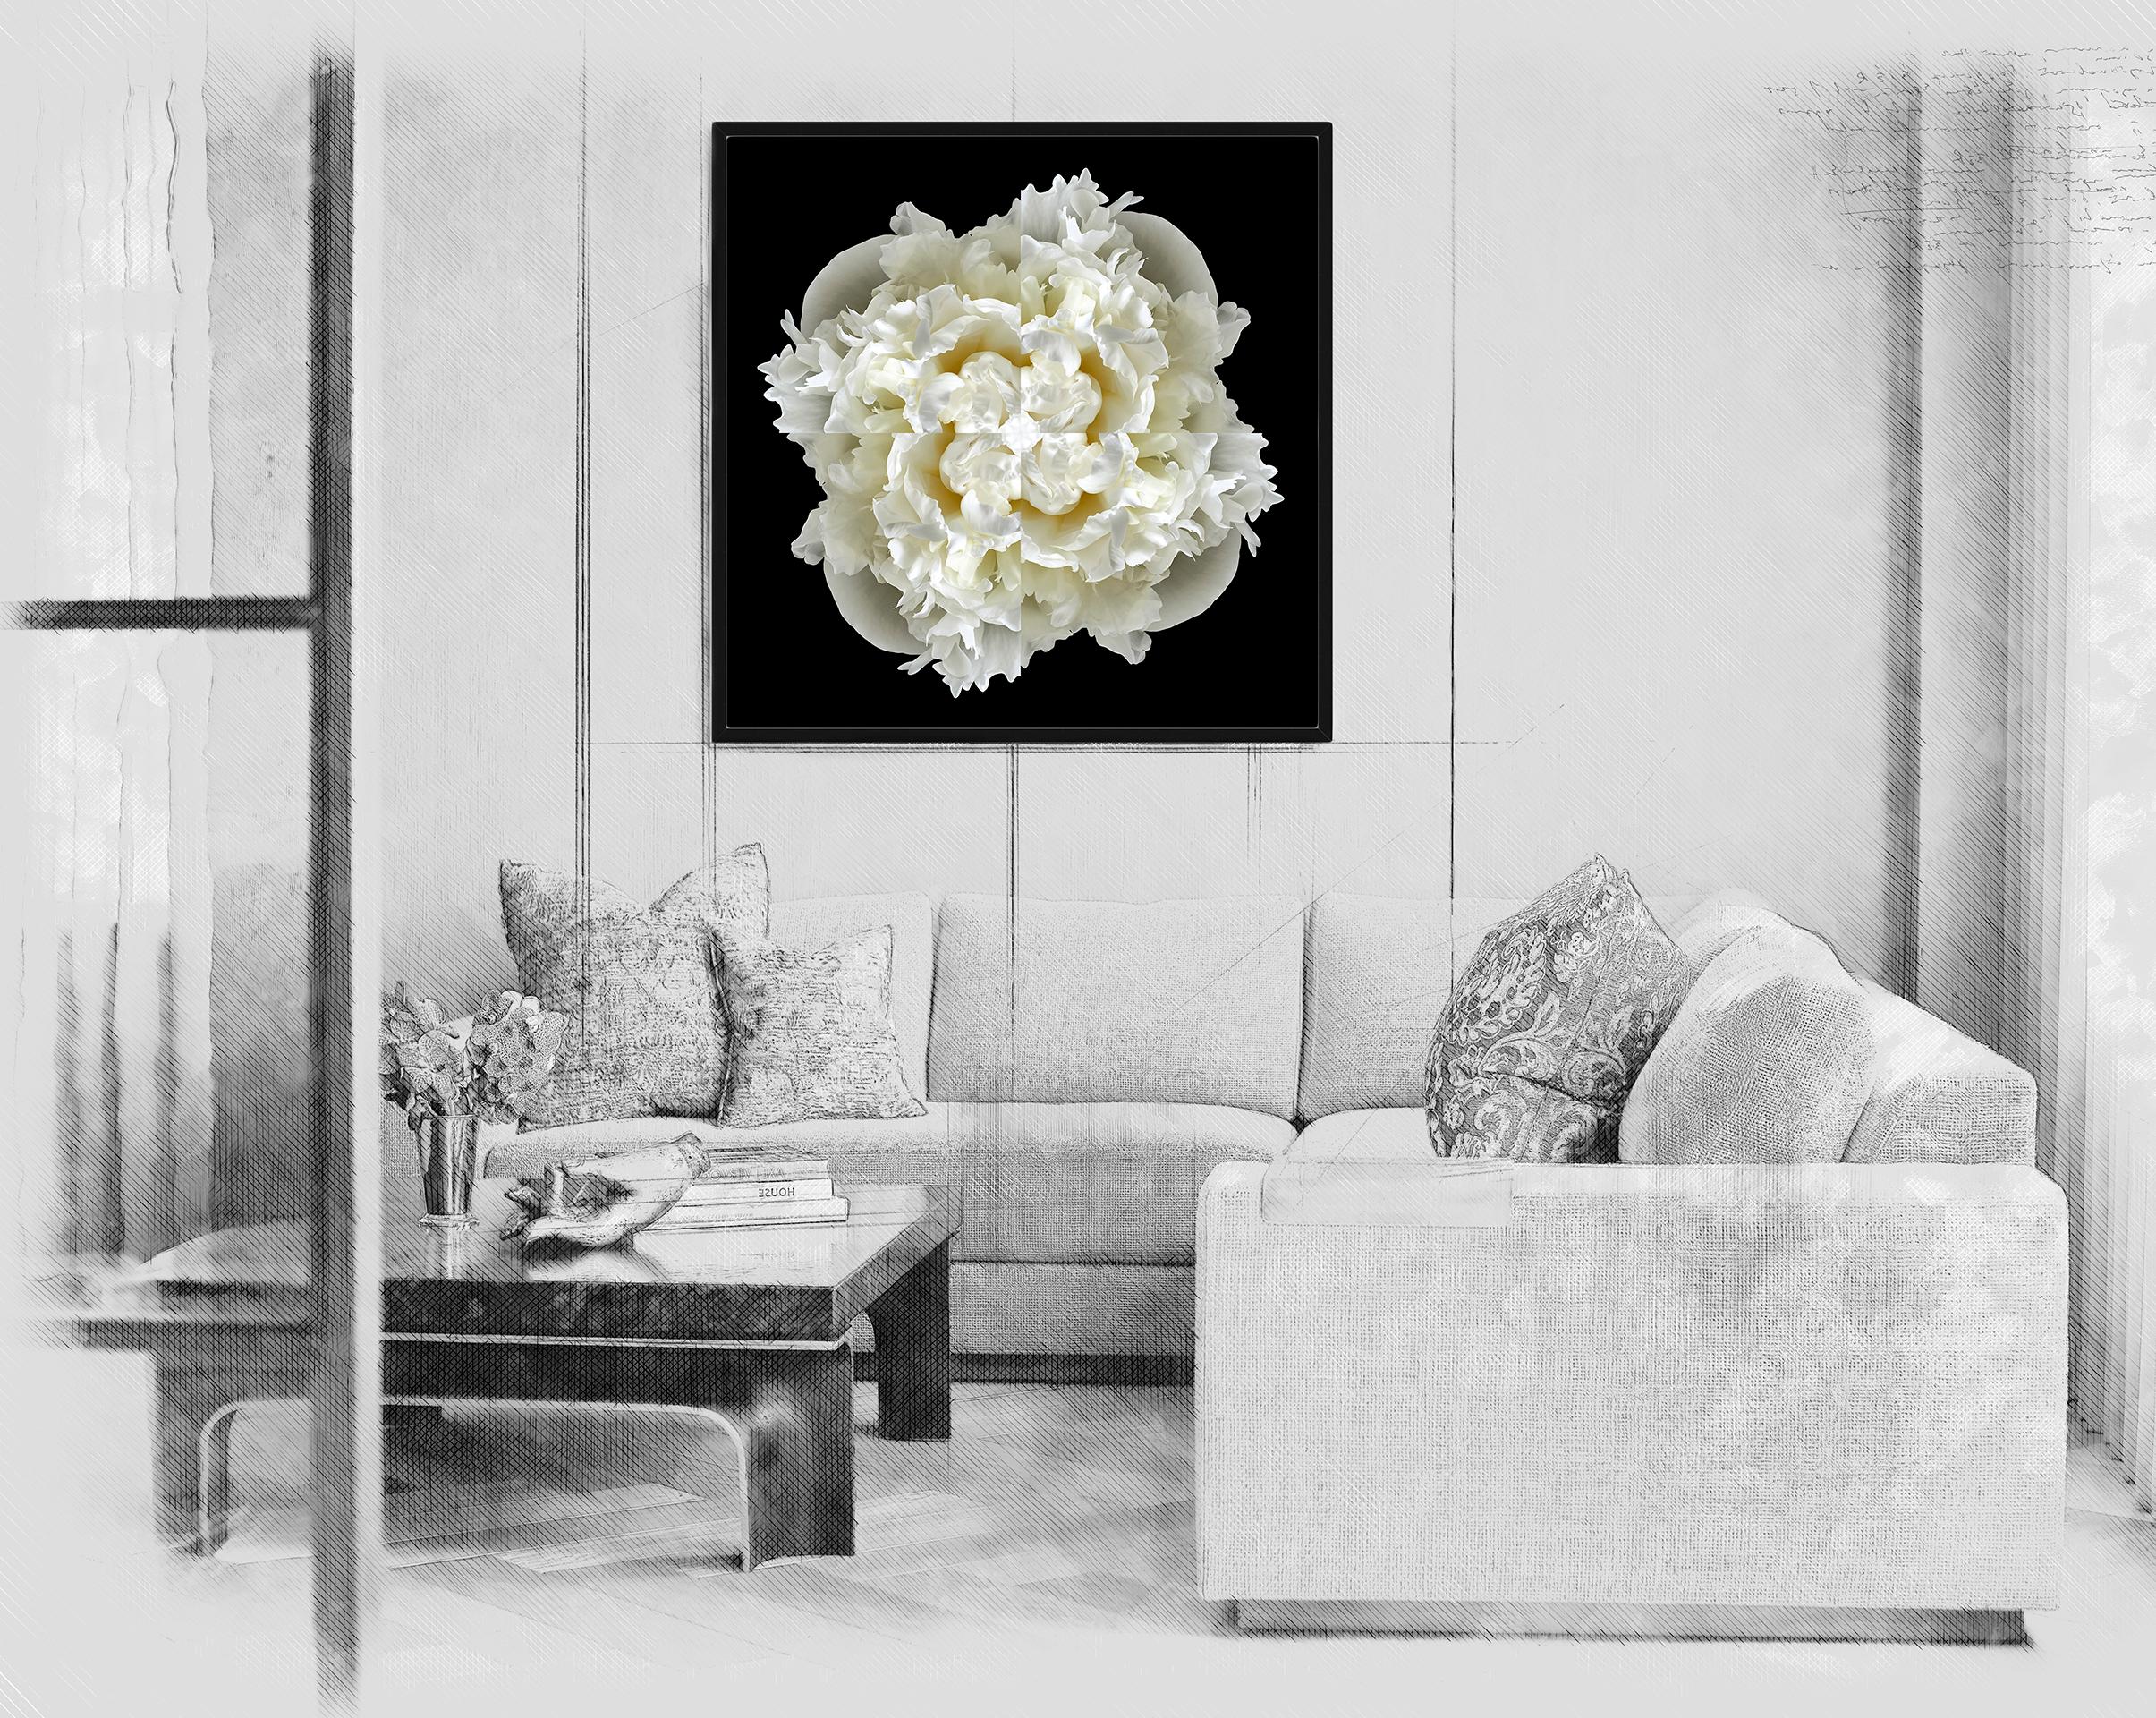 This print features the playful relationship between natural forms and botanicals. In this image Erin uses the natural composition of the white peony, and her own collage work, to create a hypnotic mandala with the floral. Some describe it as a